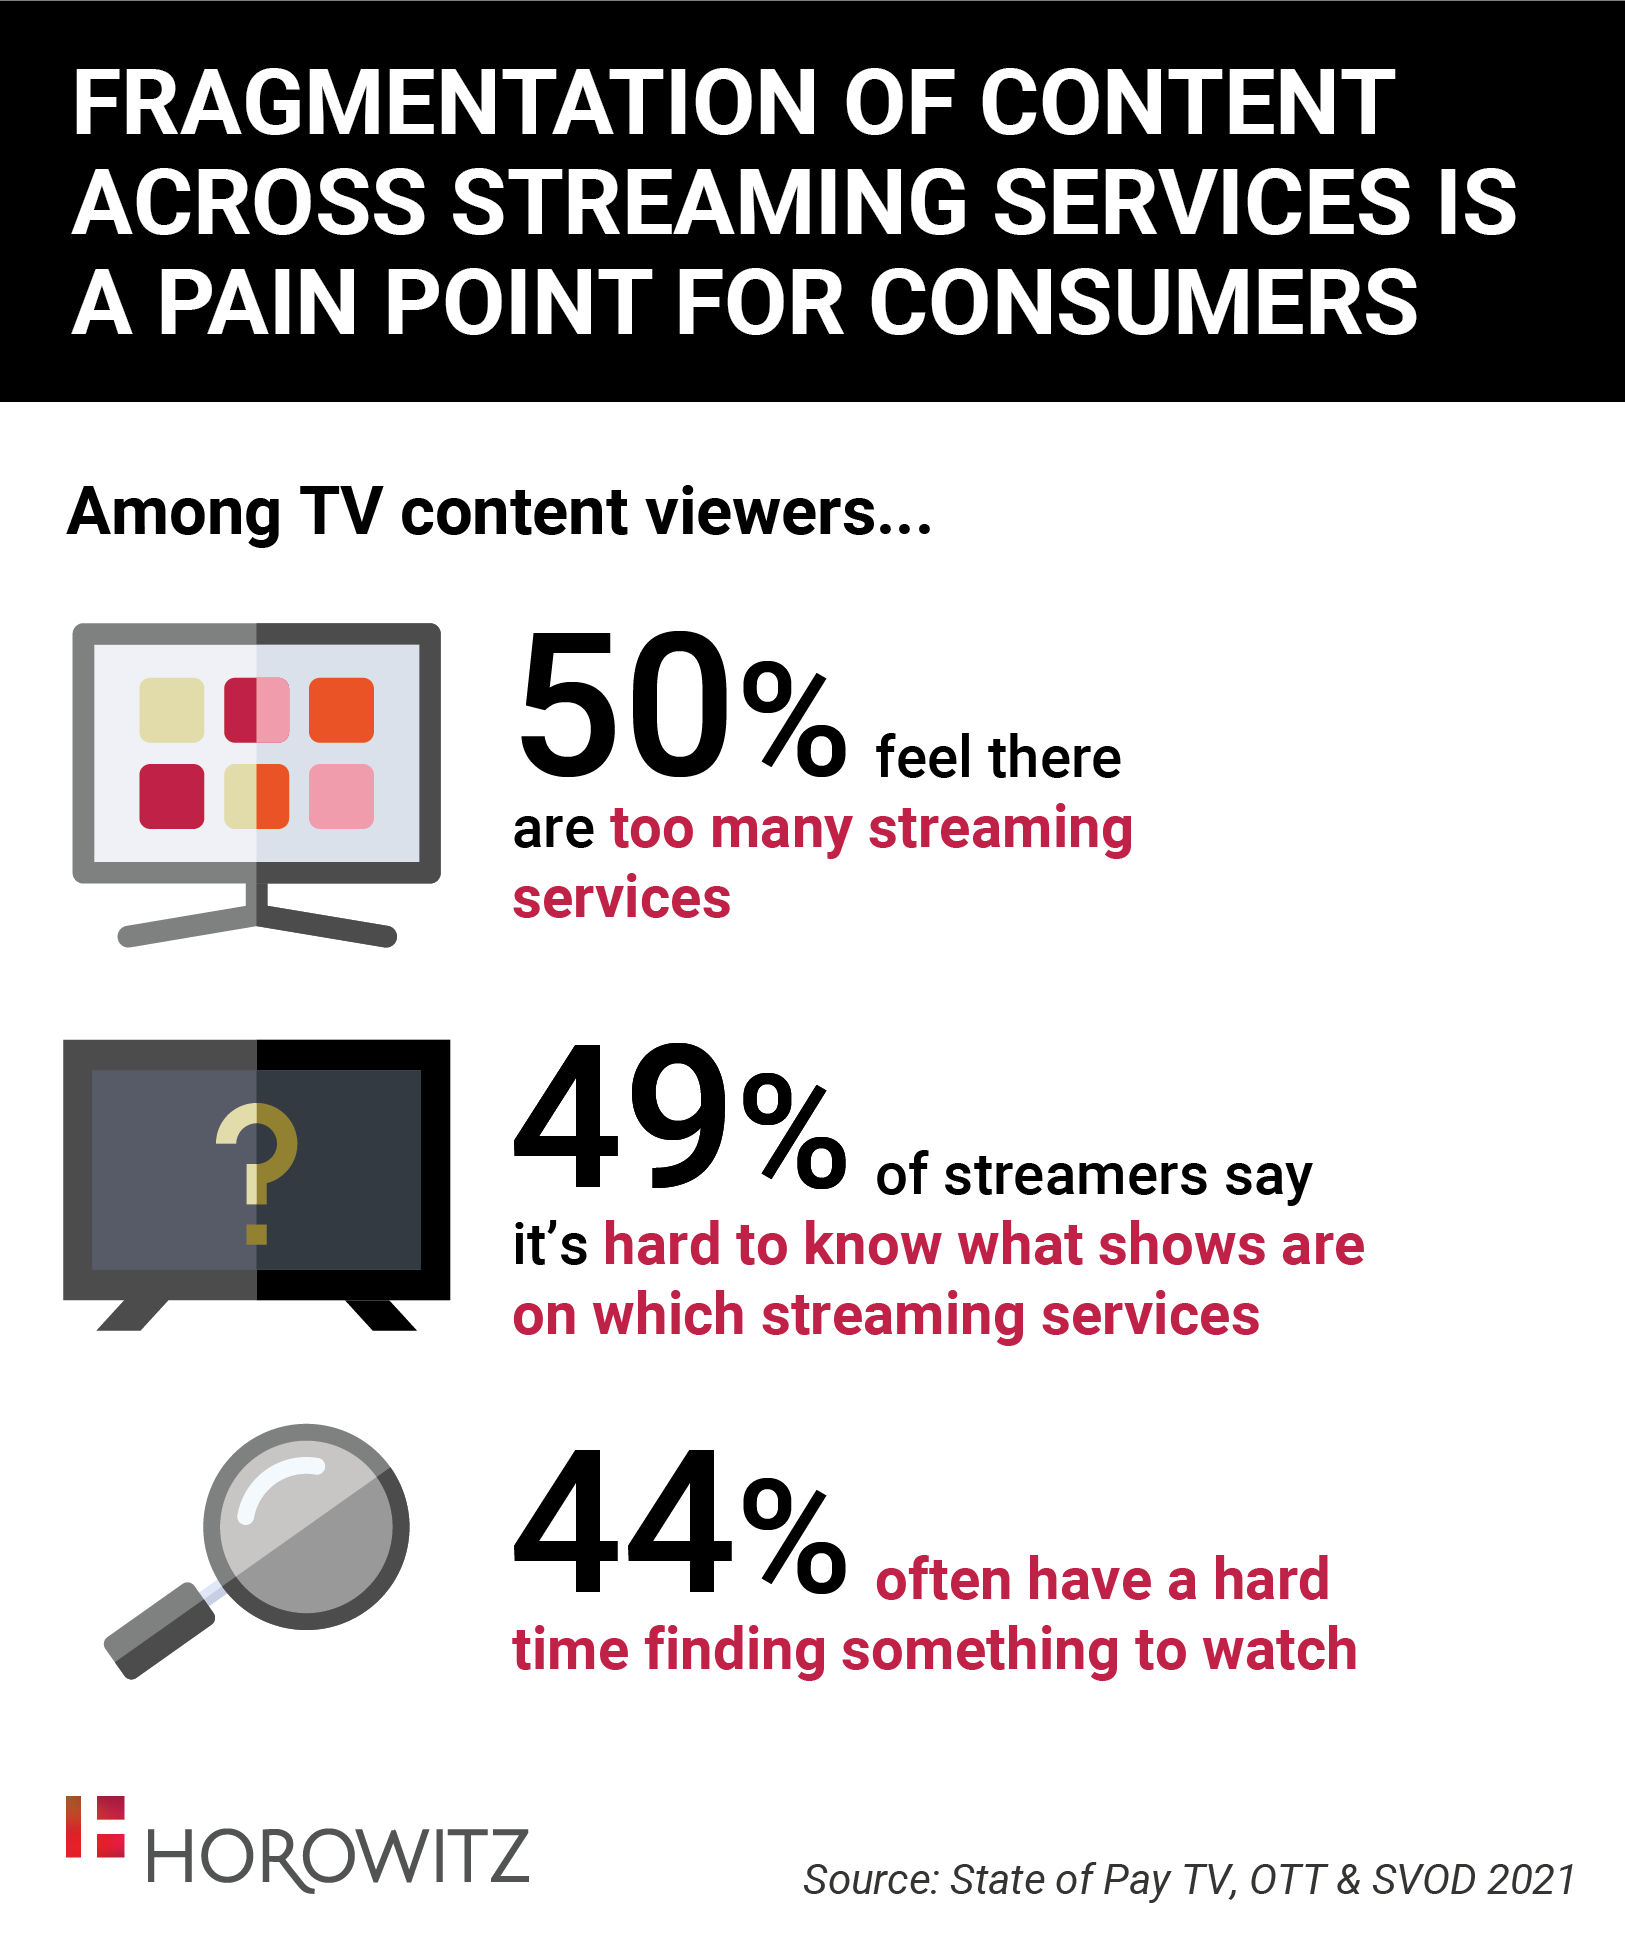 Nielsen report shows the frustration of streaming service market fragmentation and users’ desire for bundling